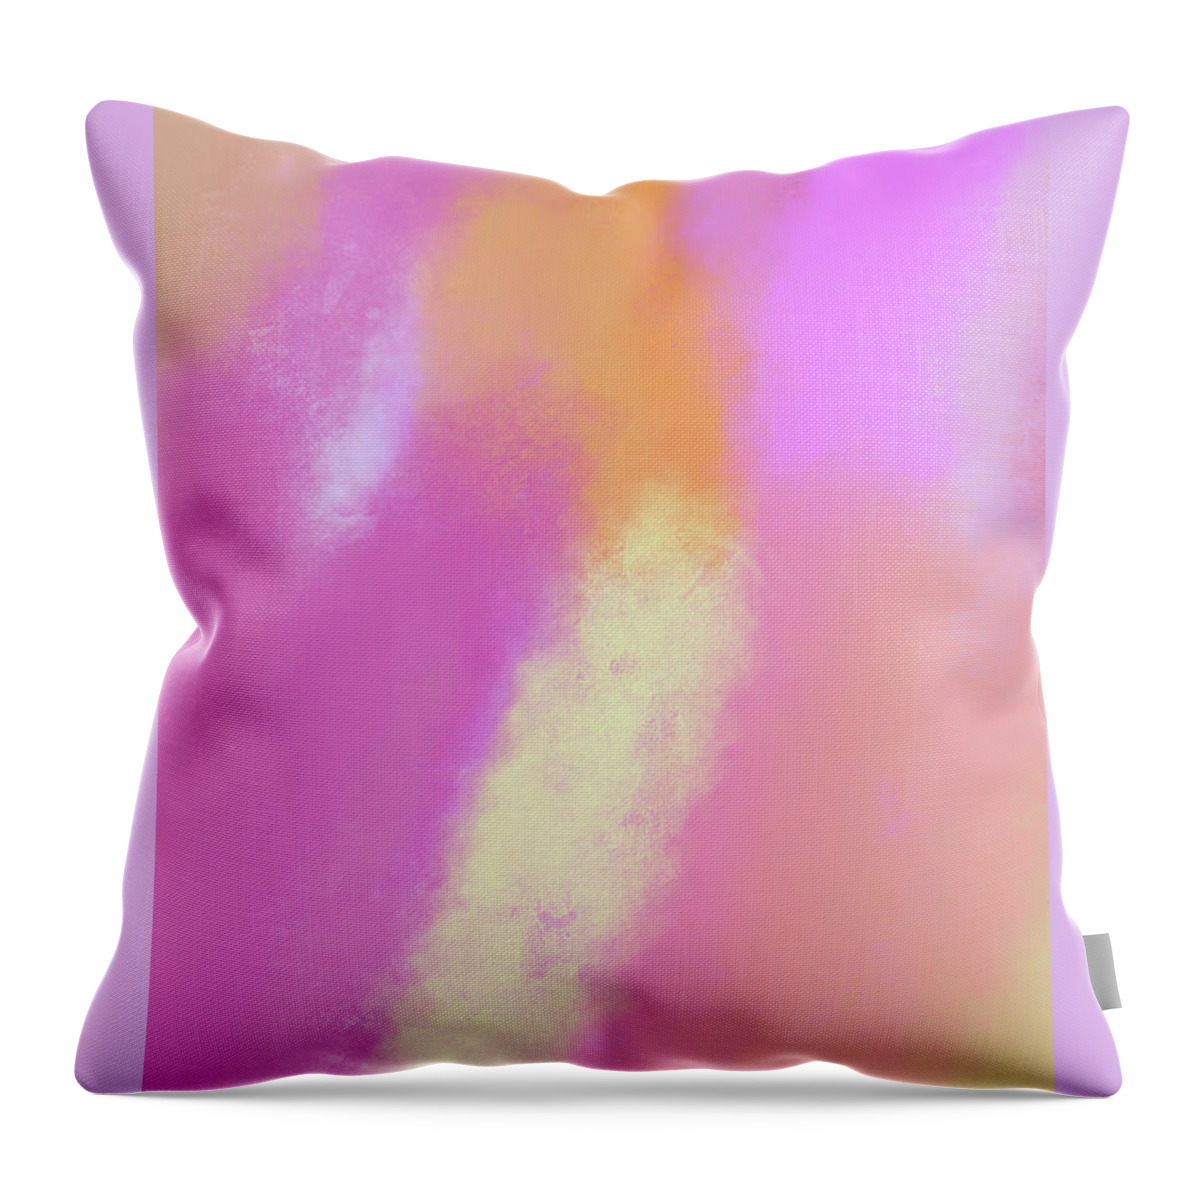  Throw Pillow featuring the digital art Colors by Art Store HOME